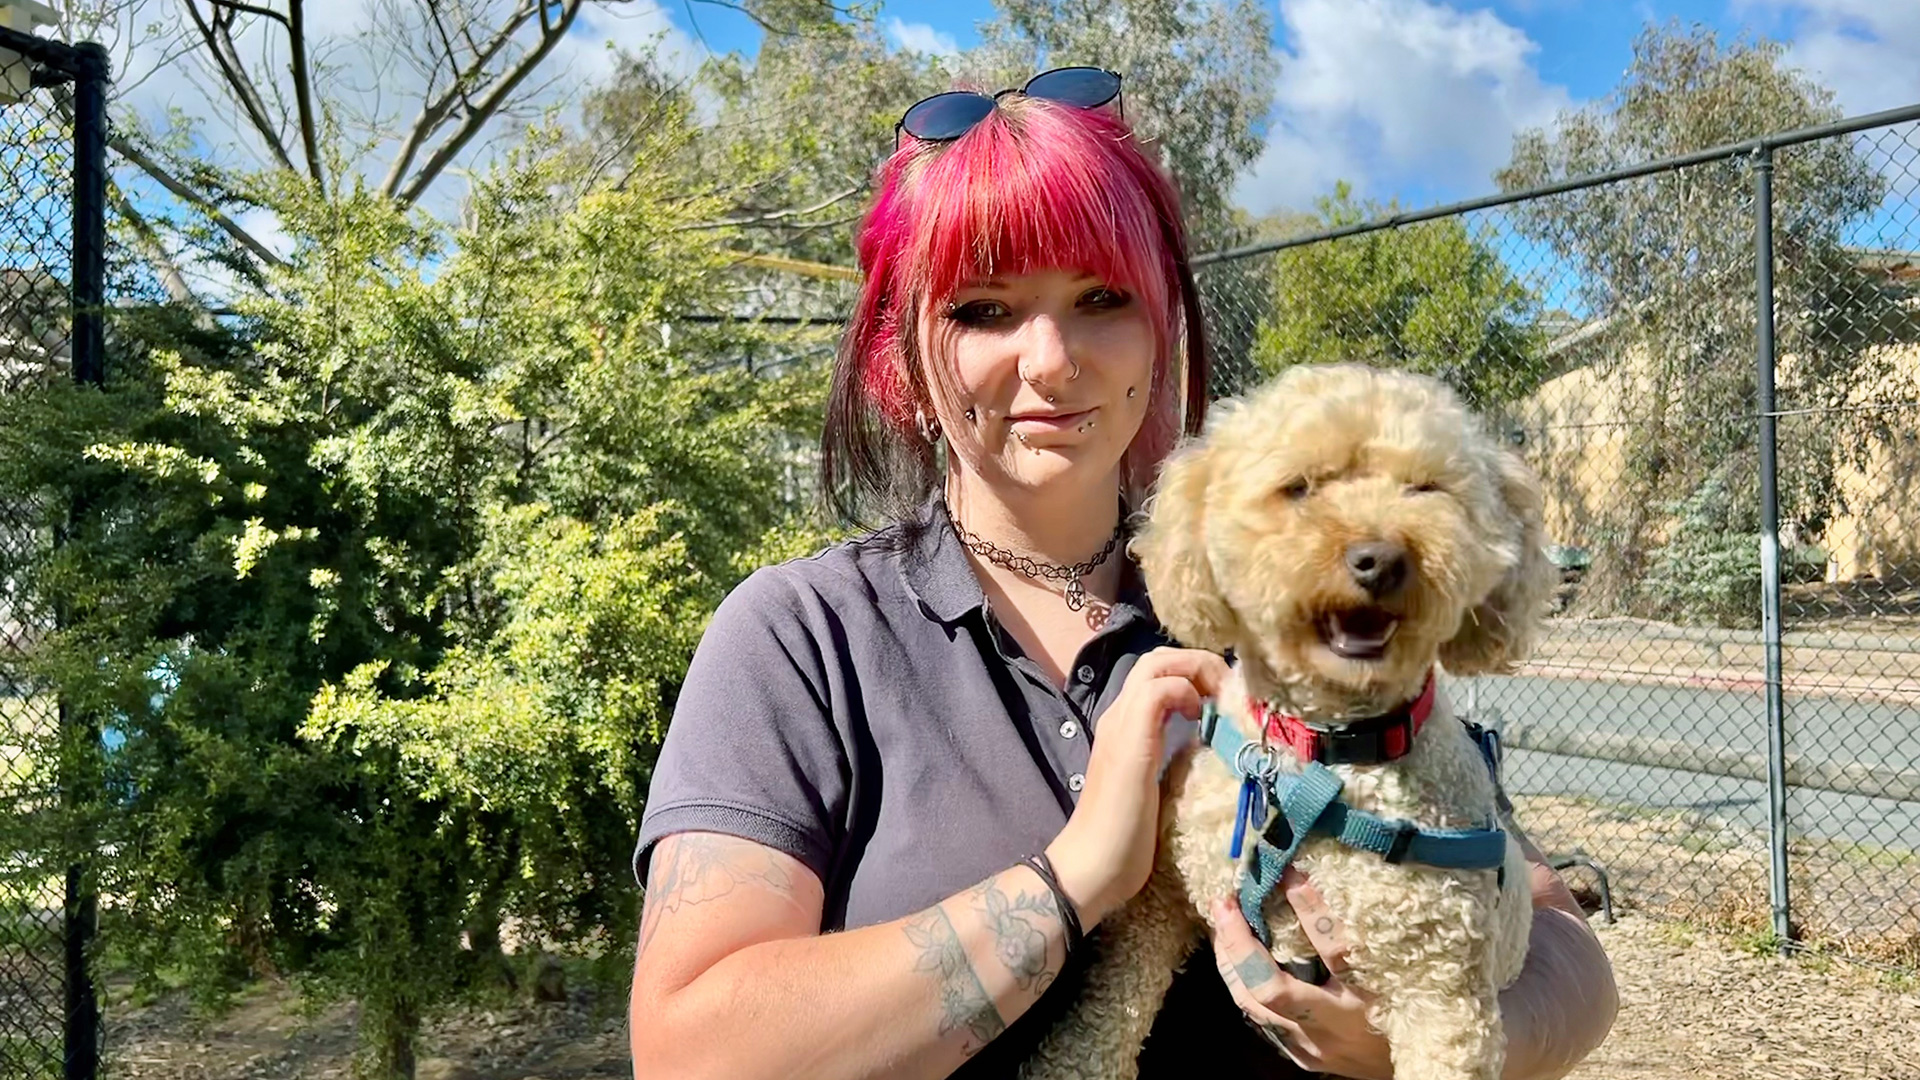 A woman with pink hair holds a small dog